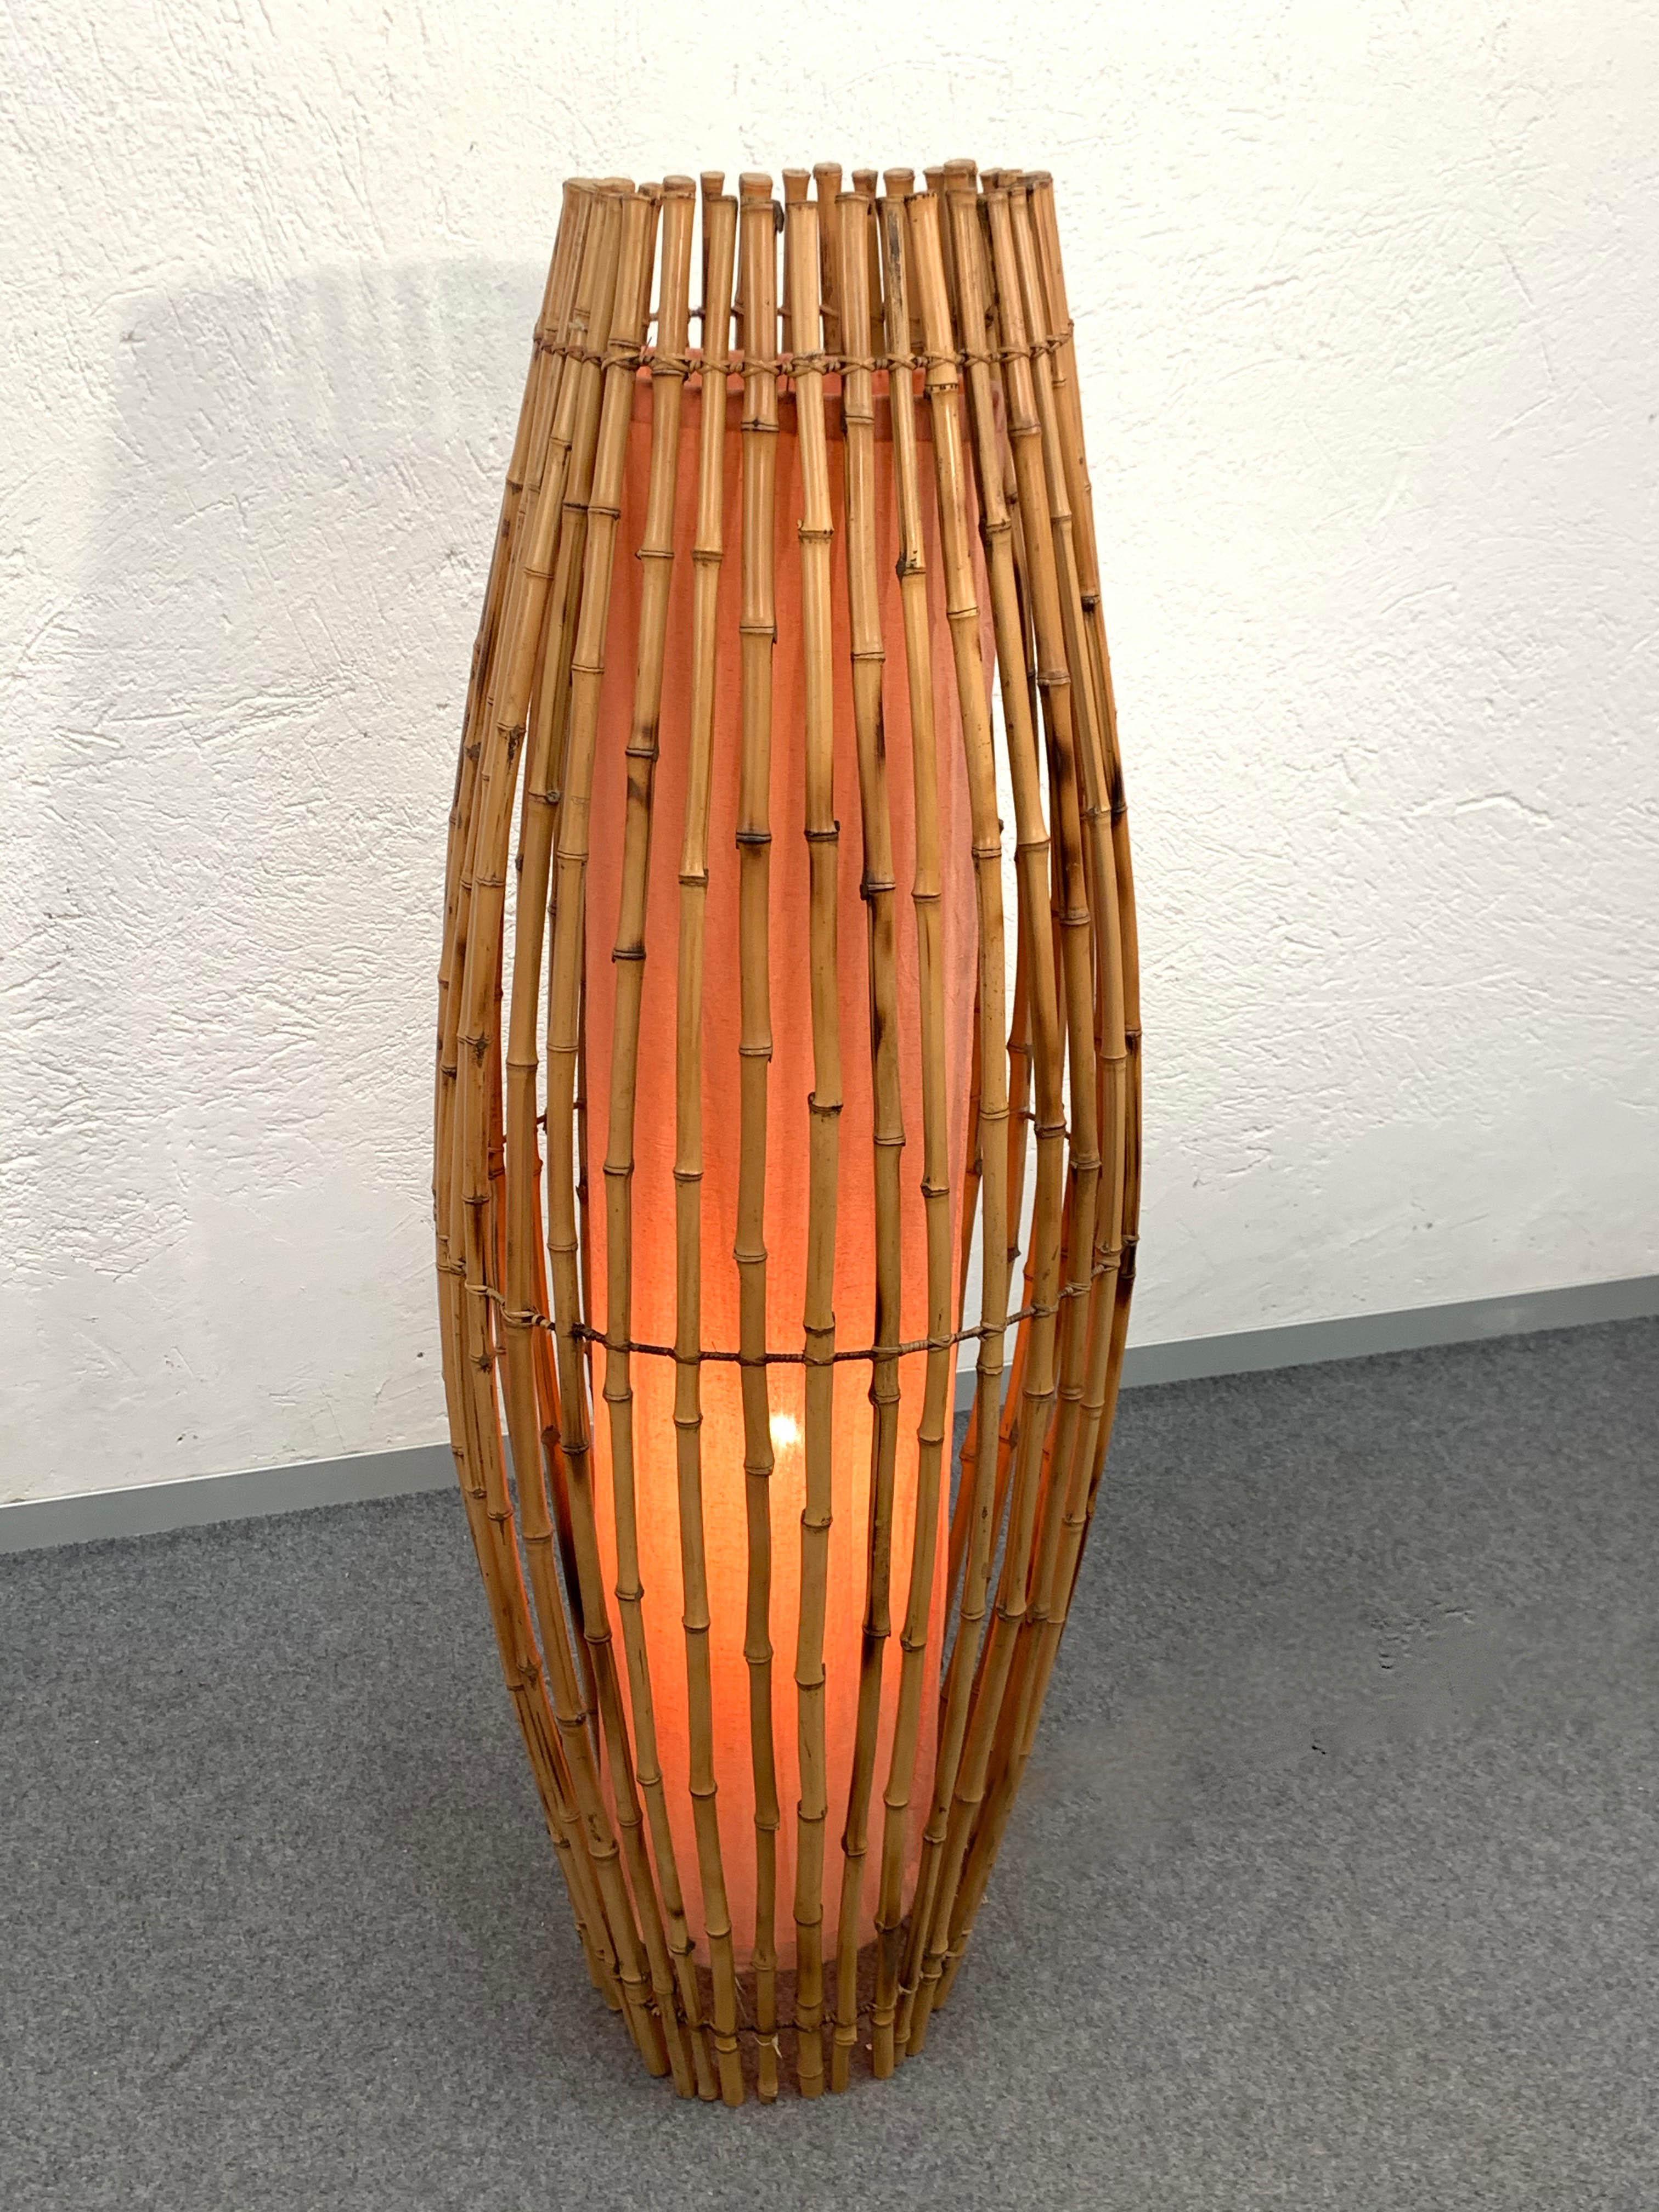 Midcentury Italian Bamboo and Rattan Floor Lamp Attributed to Albini, 1960s In Good Condition For Sale In Roma, IT